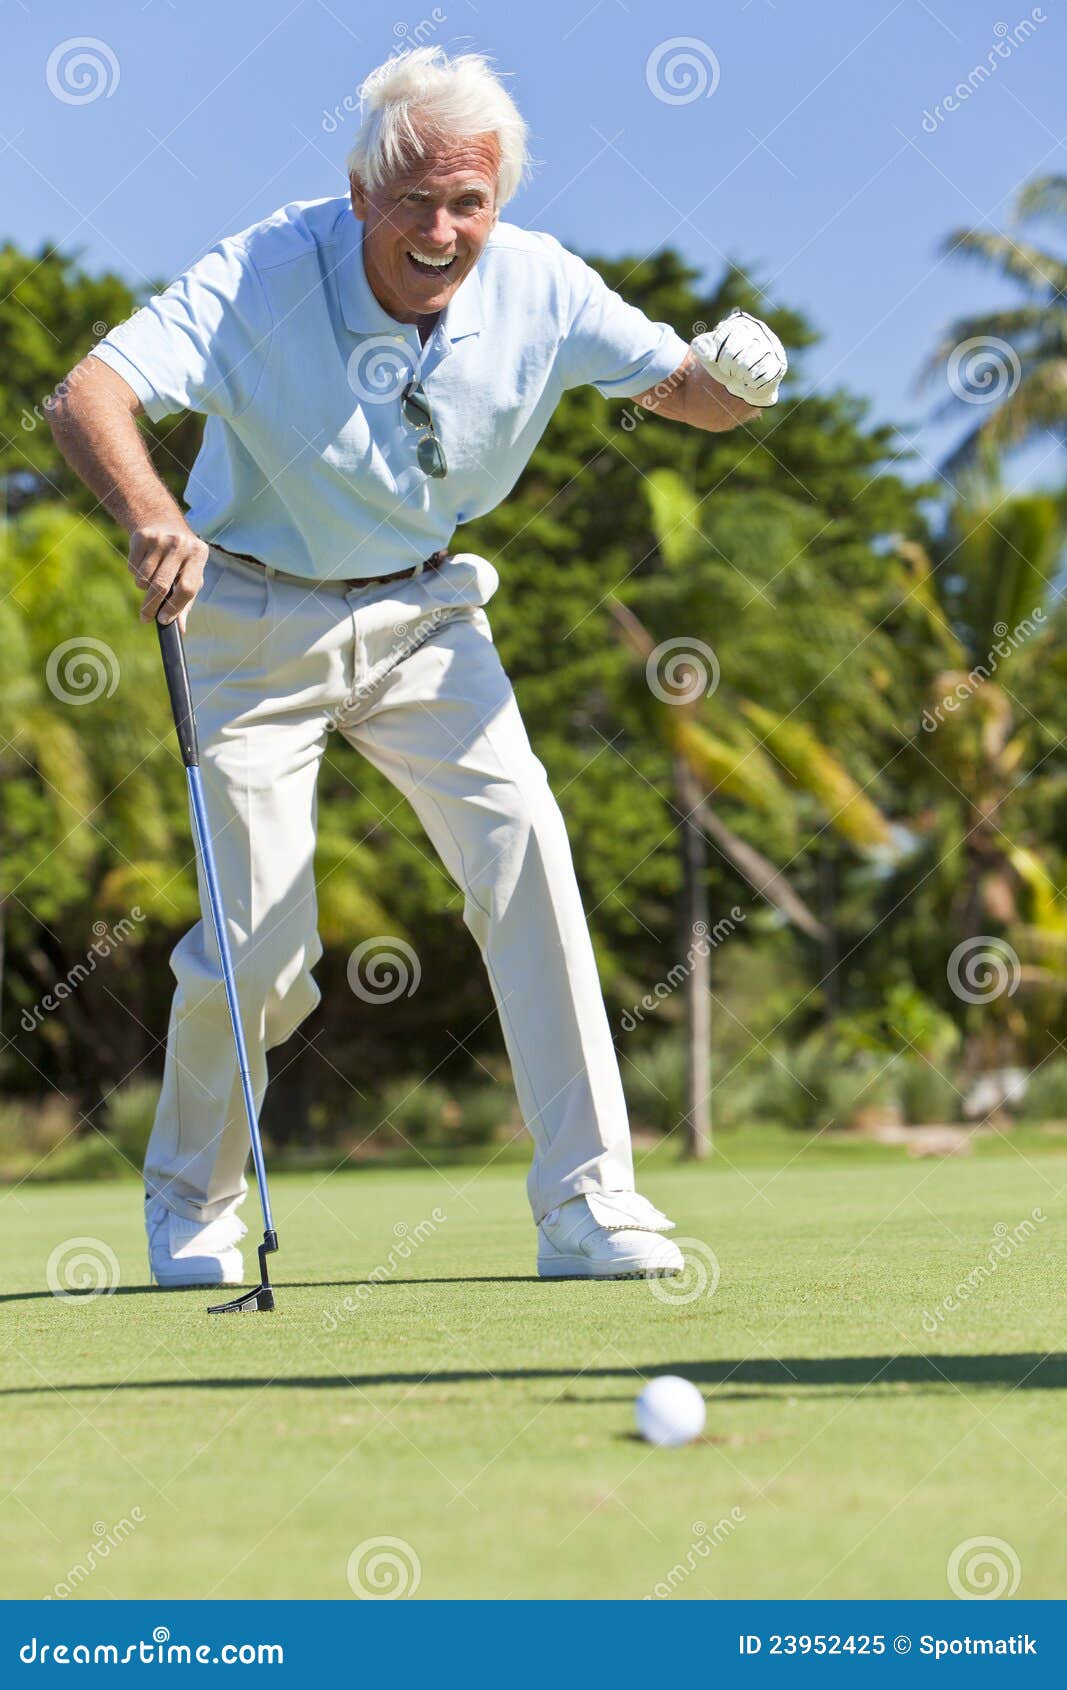 clipart man playing golf - photo #45